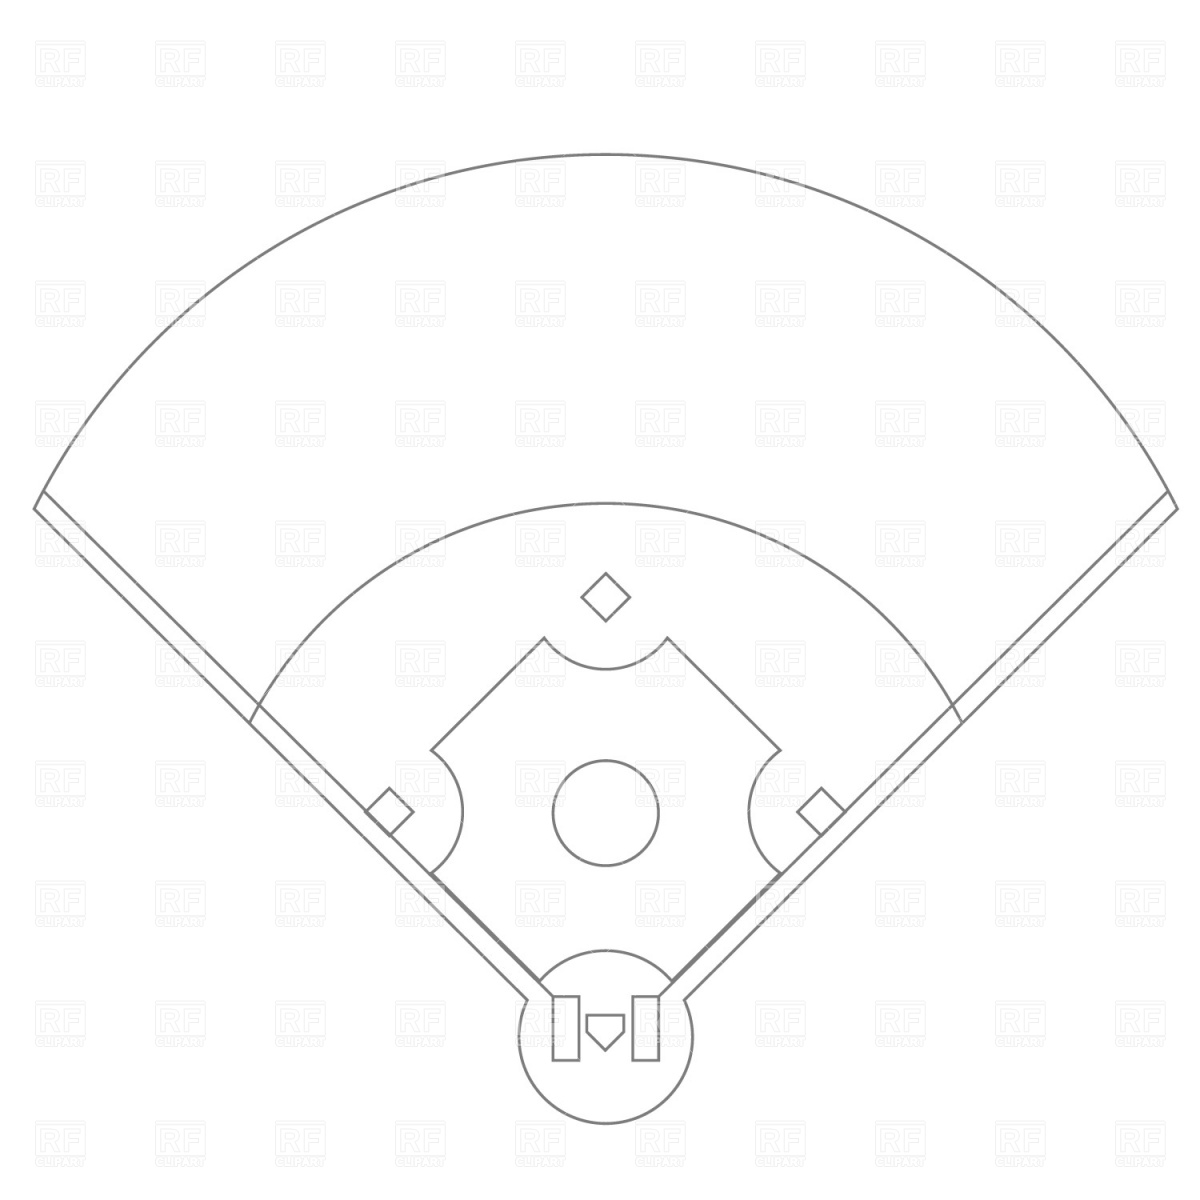 Free How To Draw A Baseball Field, Download Free How To Draw A Baseball